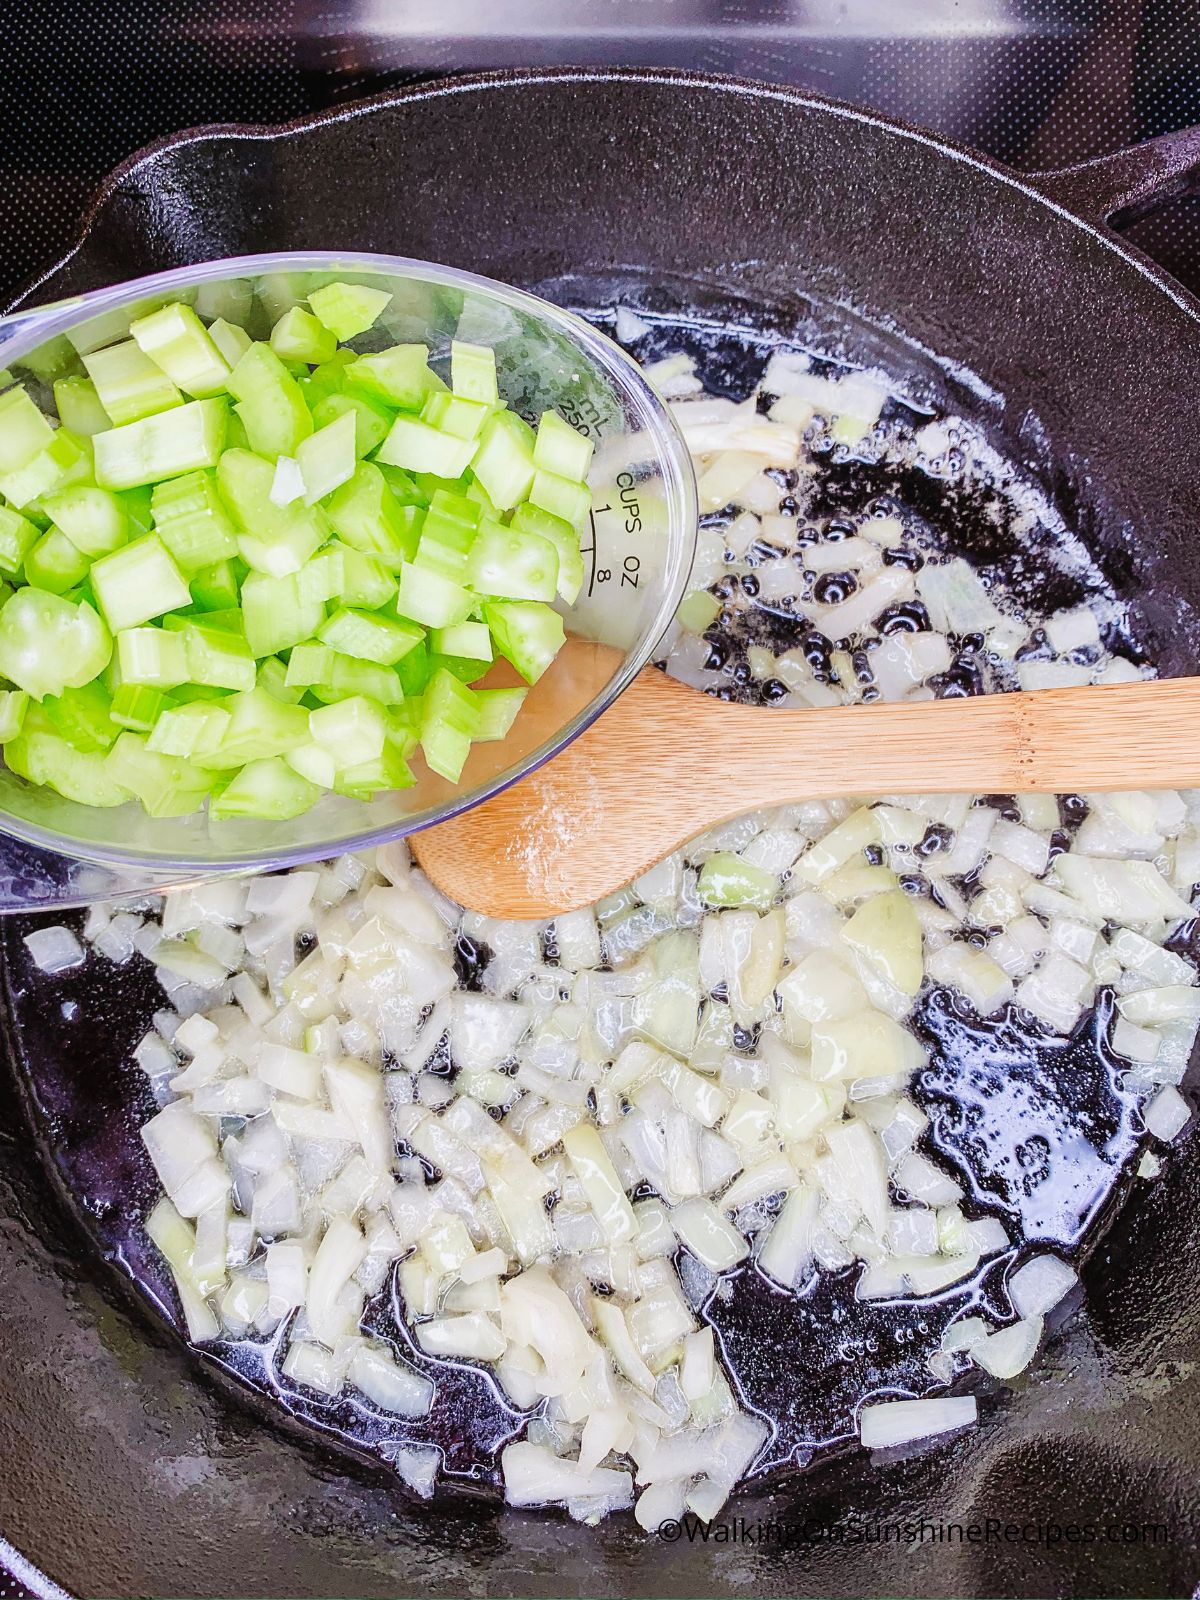 Add celery to cast iron skillet with onion.